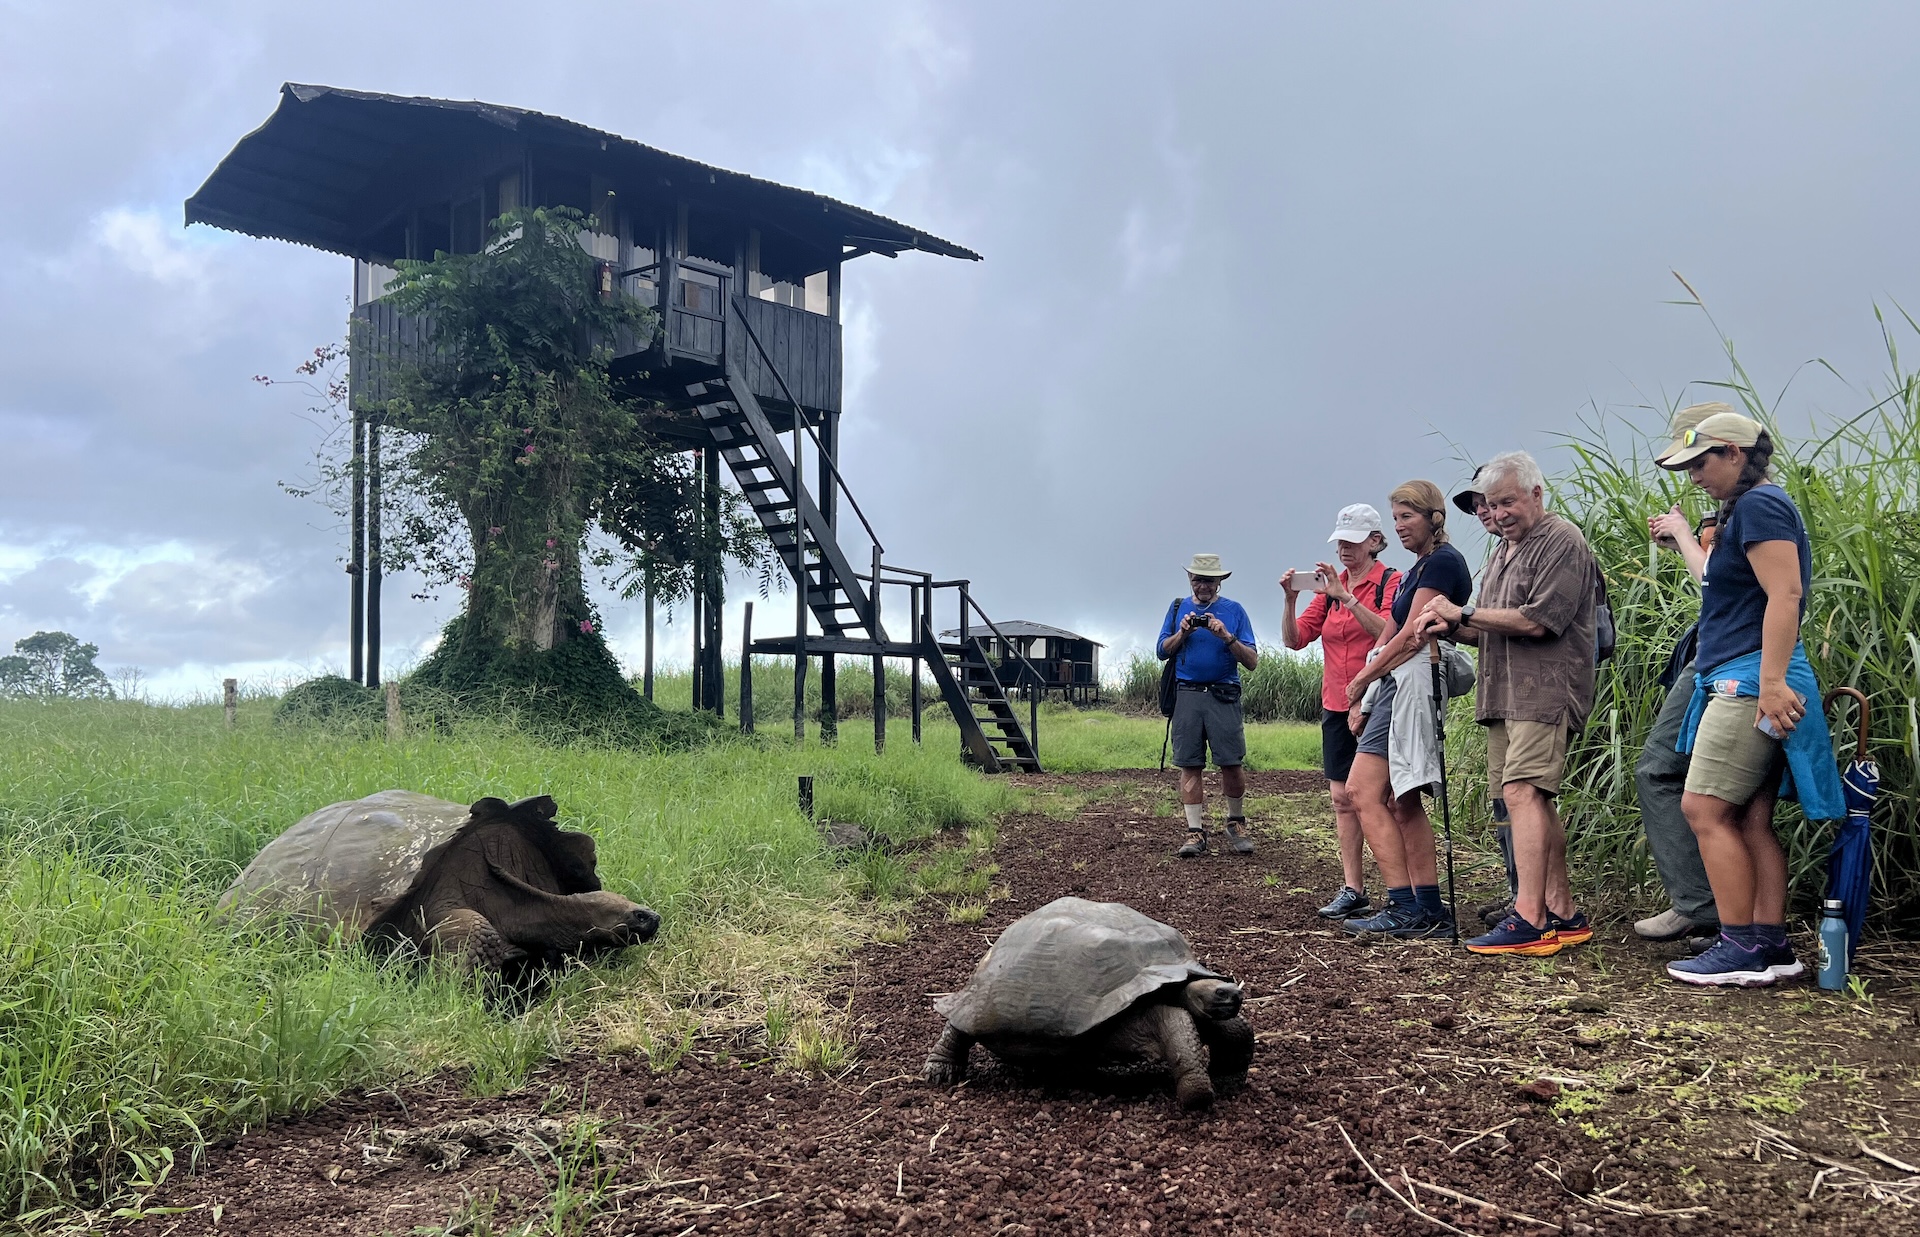 Guests at Nat Hab's private Tortoise Camp in the Galapagos by Luis Vinueza